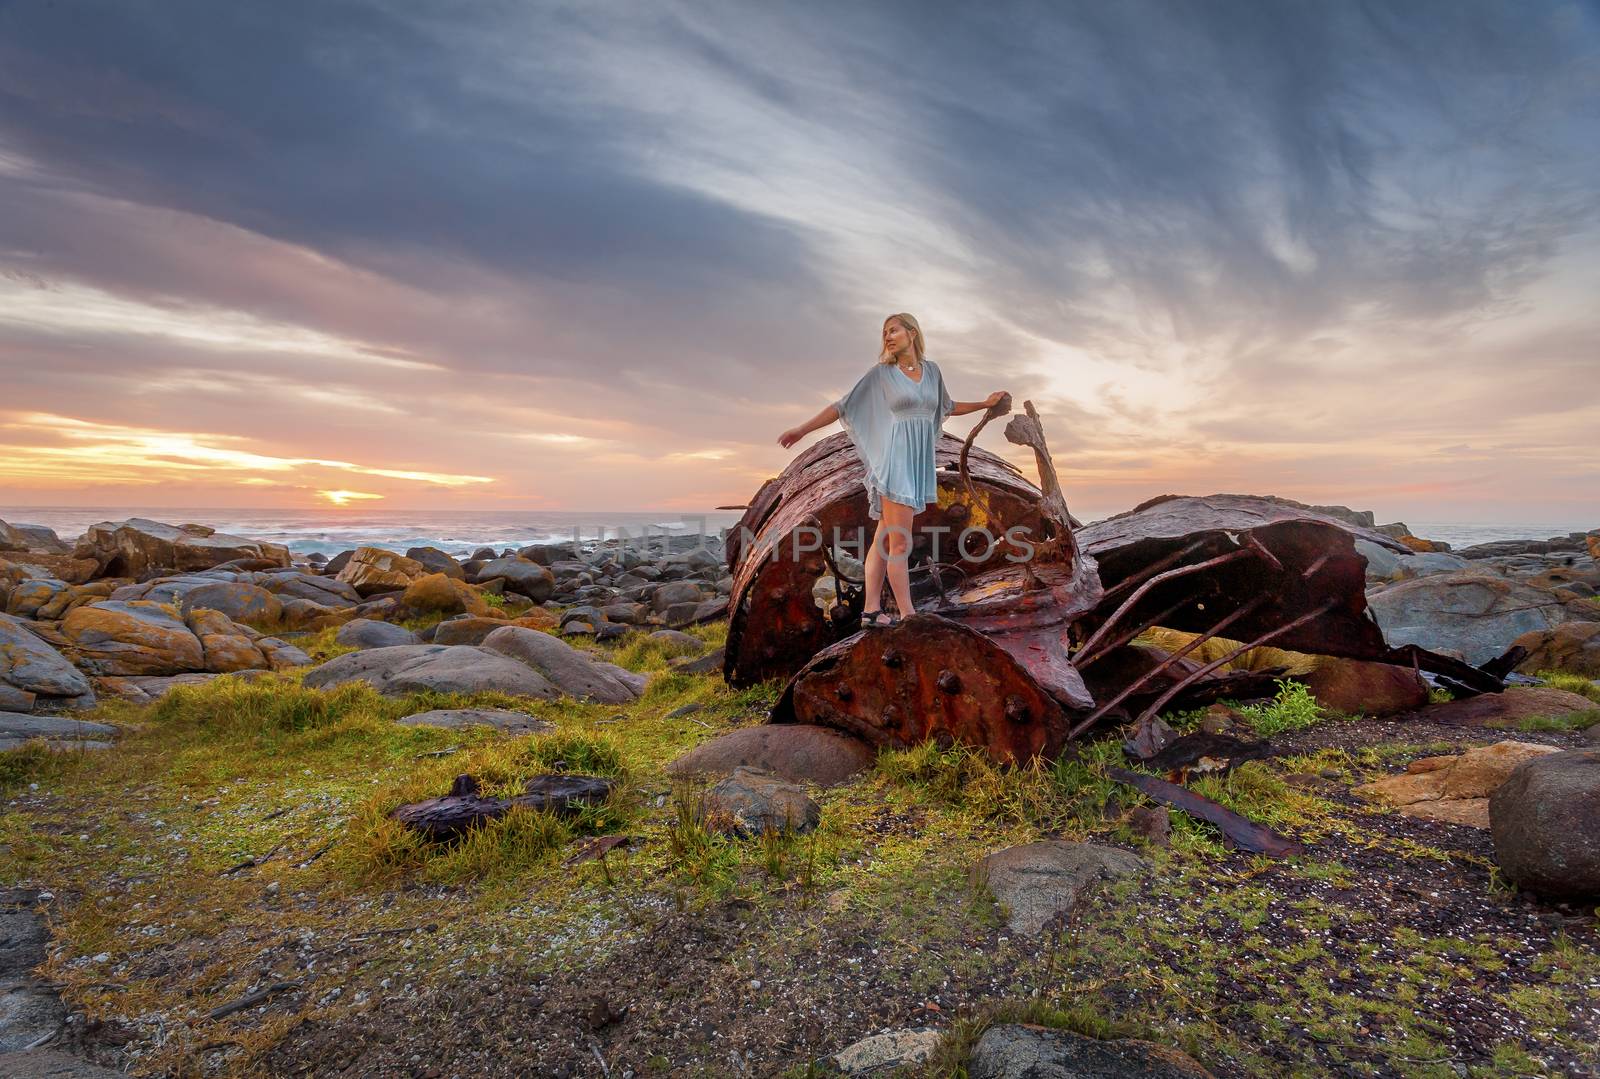 Female explores the rusted remains of a shipwreck parts of which have washed ashore along Australian coastline